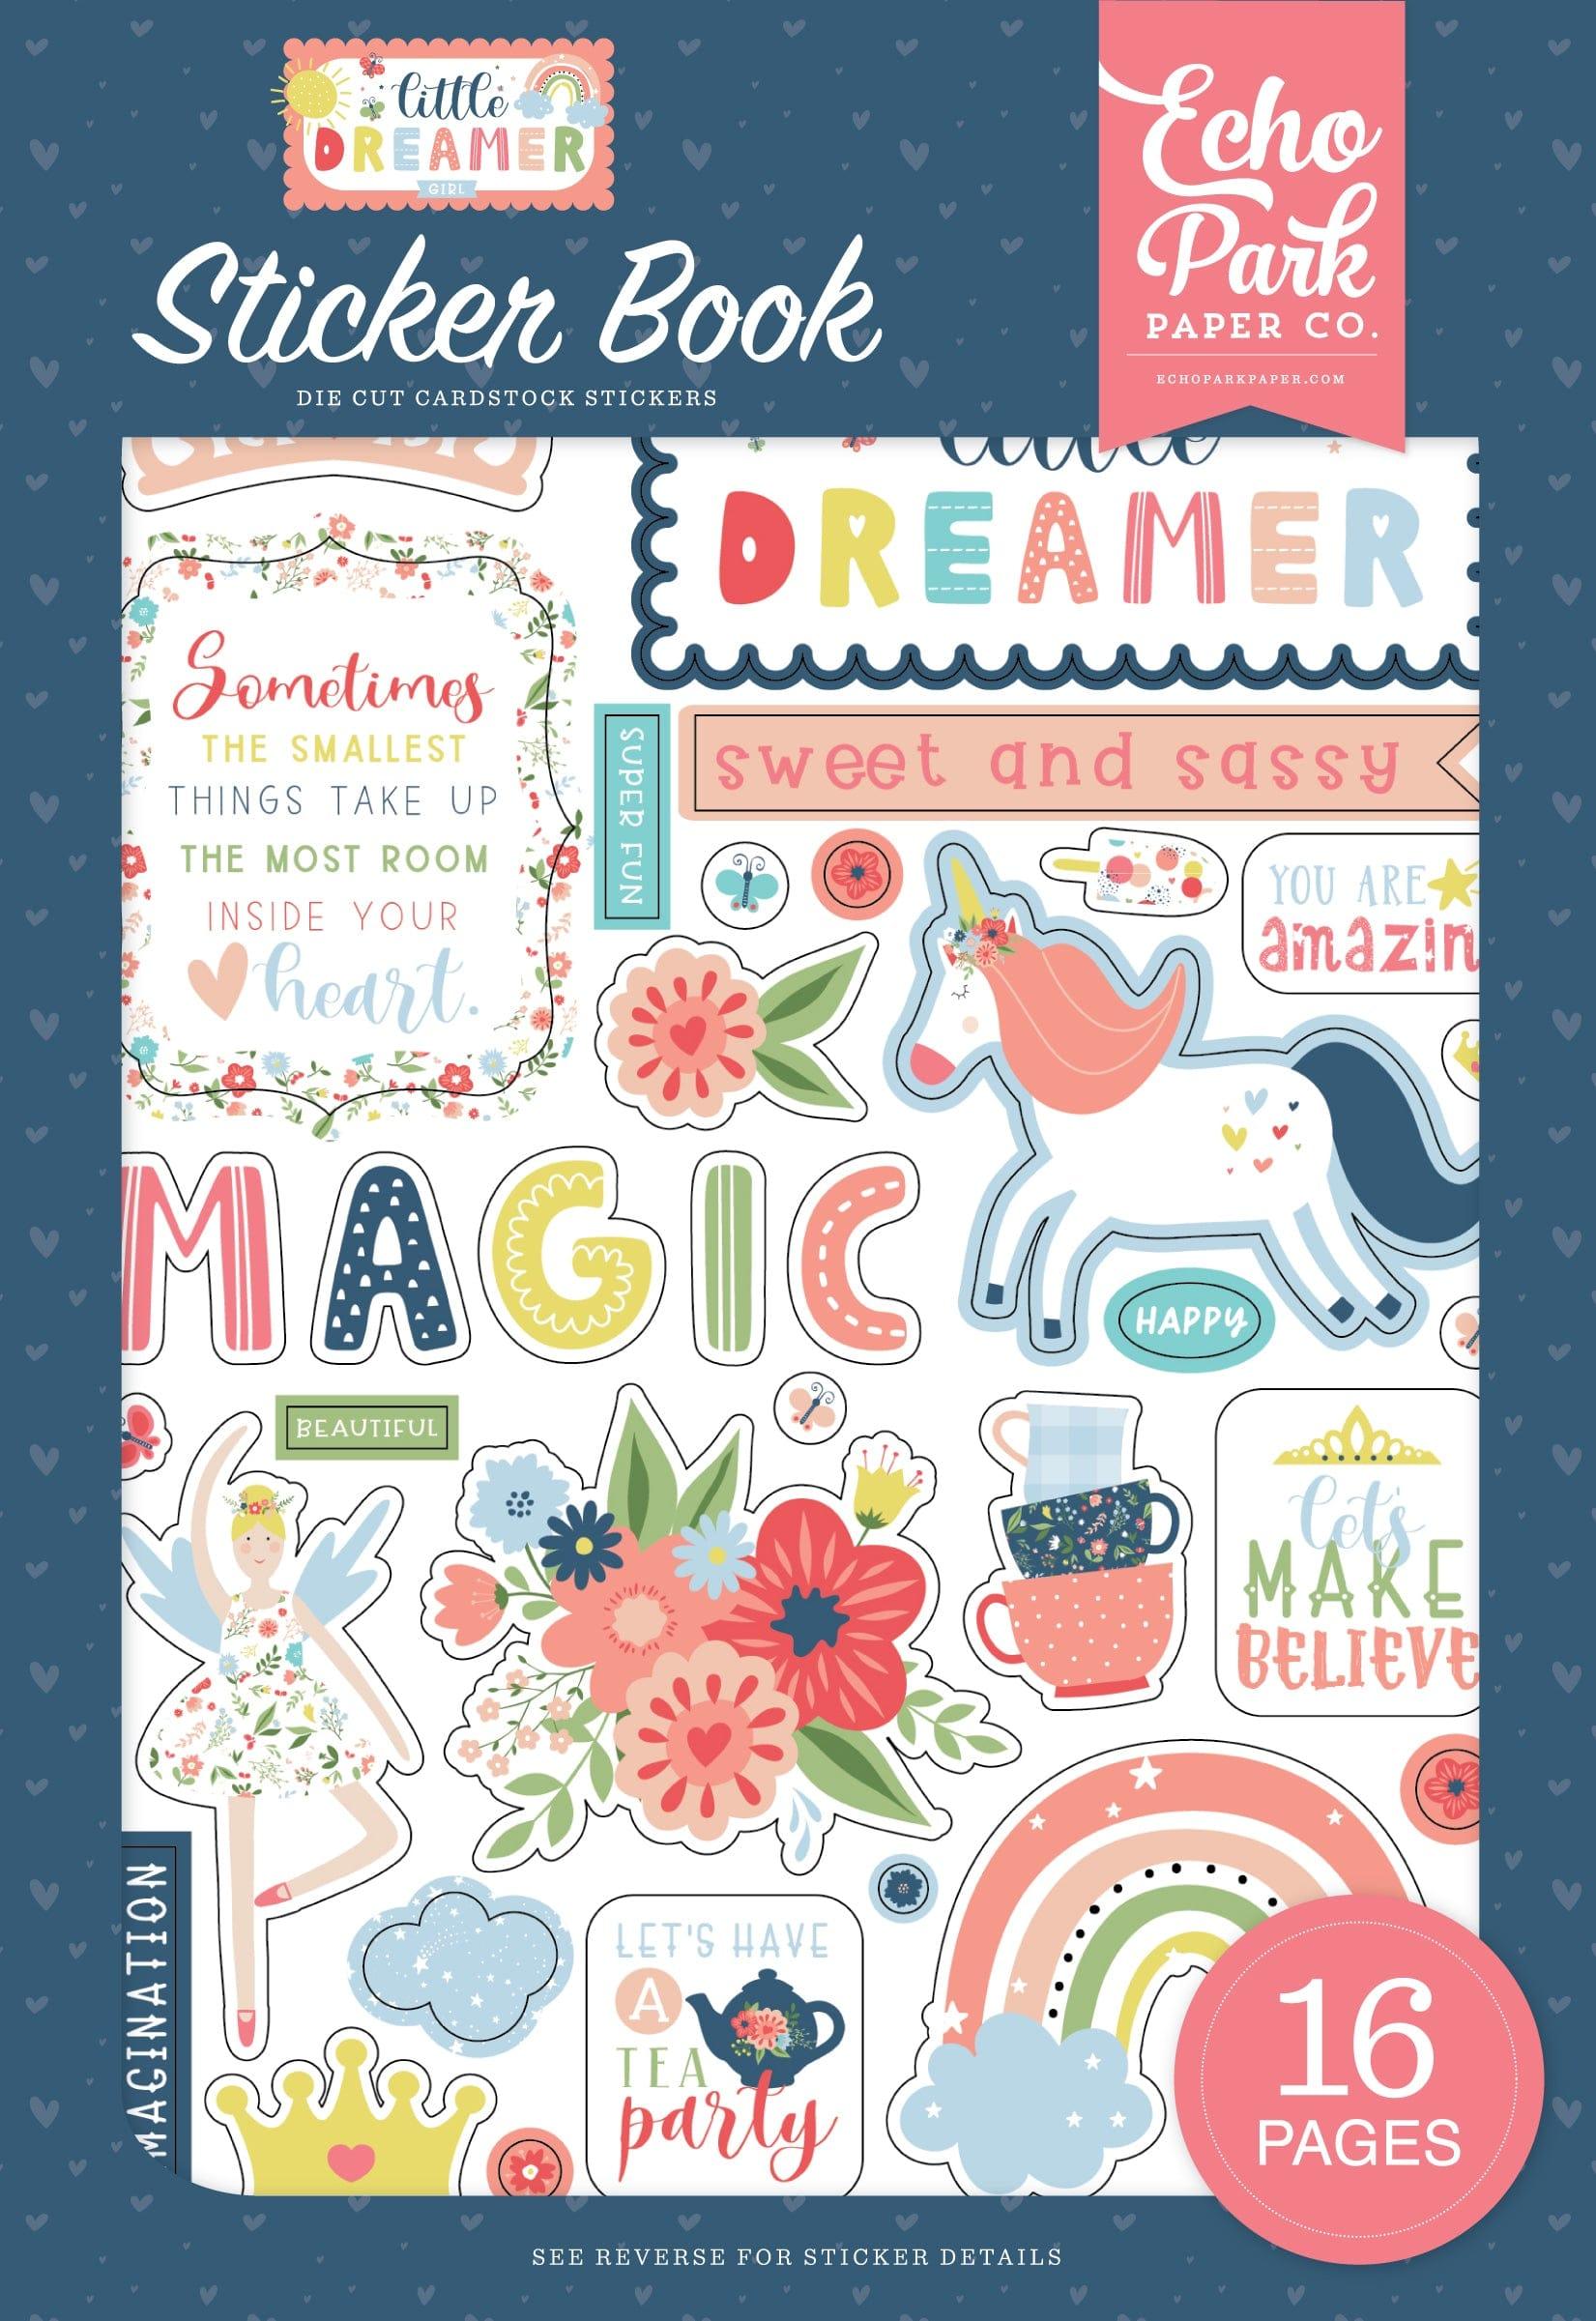 Little Dreamer Girl Collection Sticker Book by Echo Park Paper-16 pages - Scrapbook Supply Companies